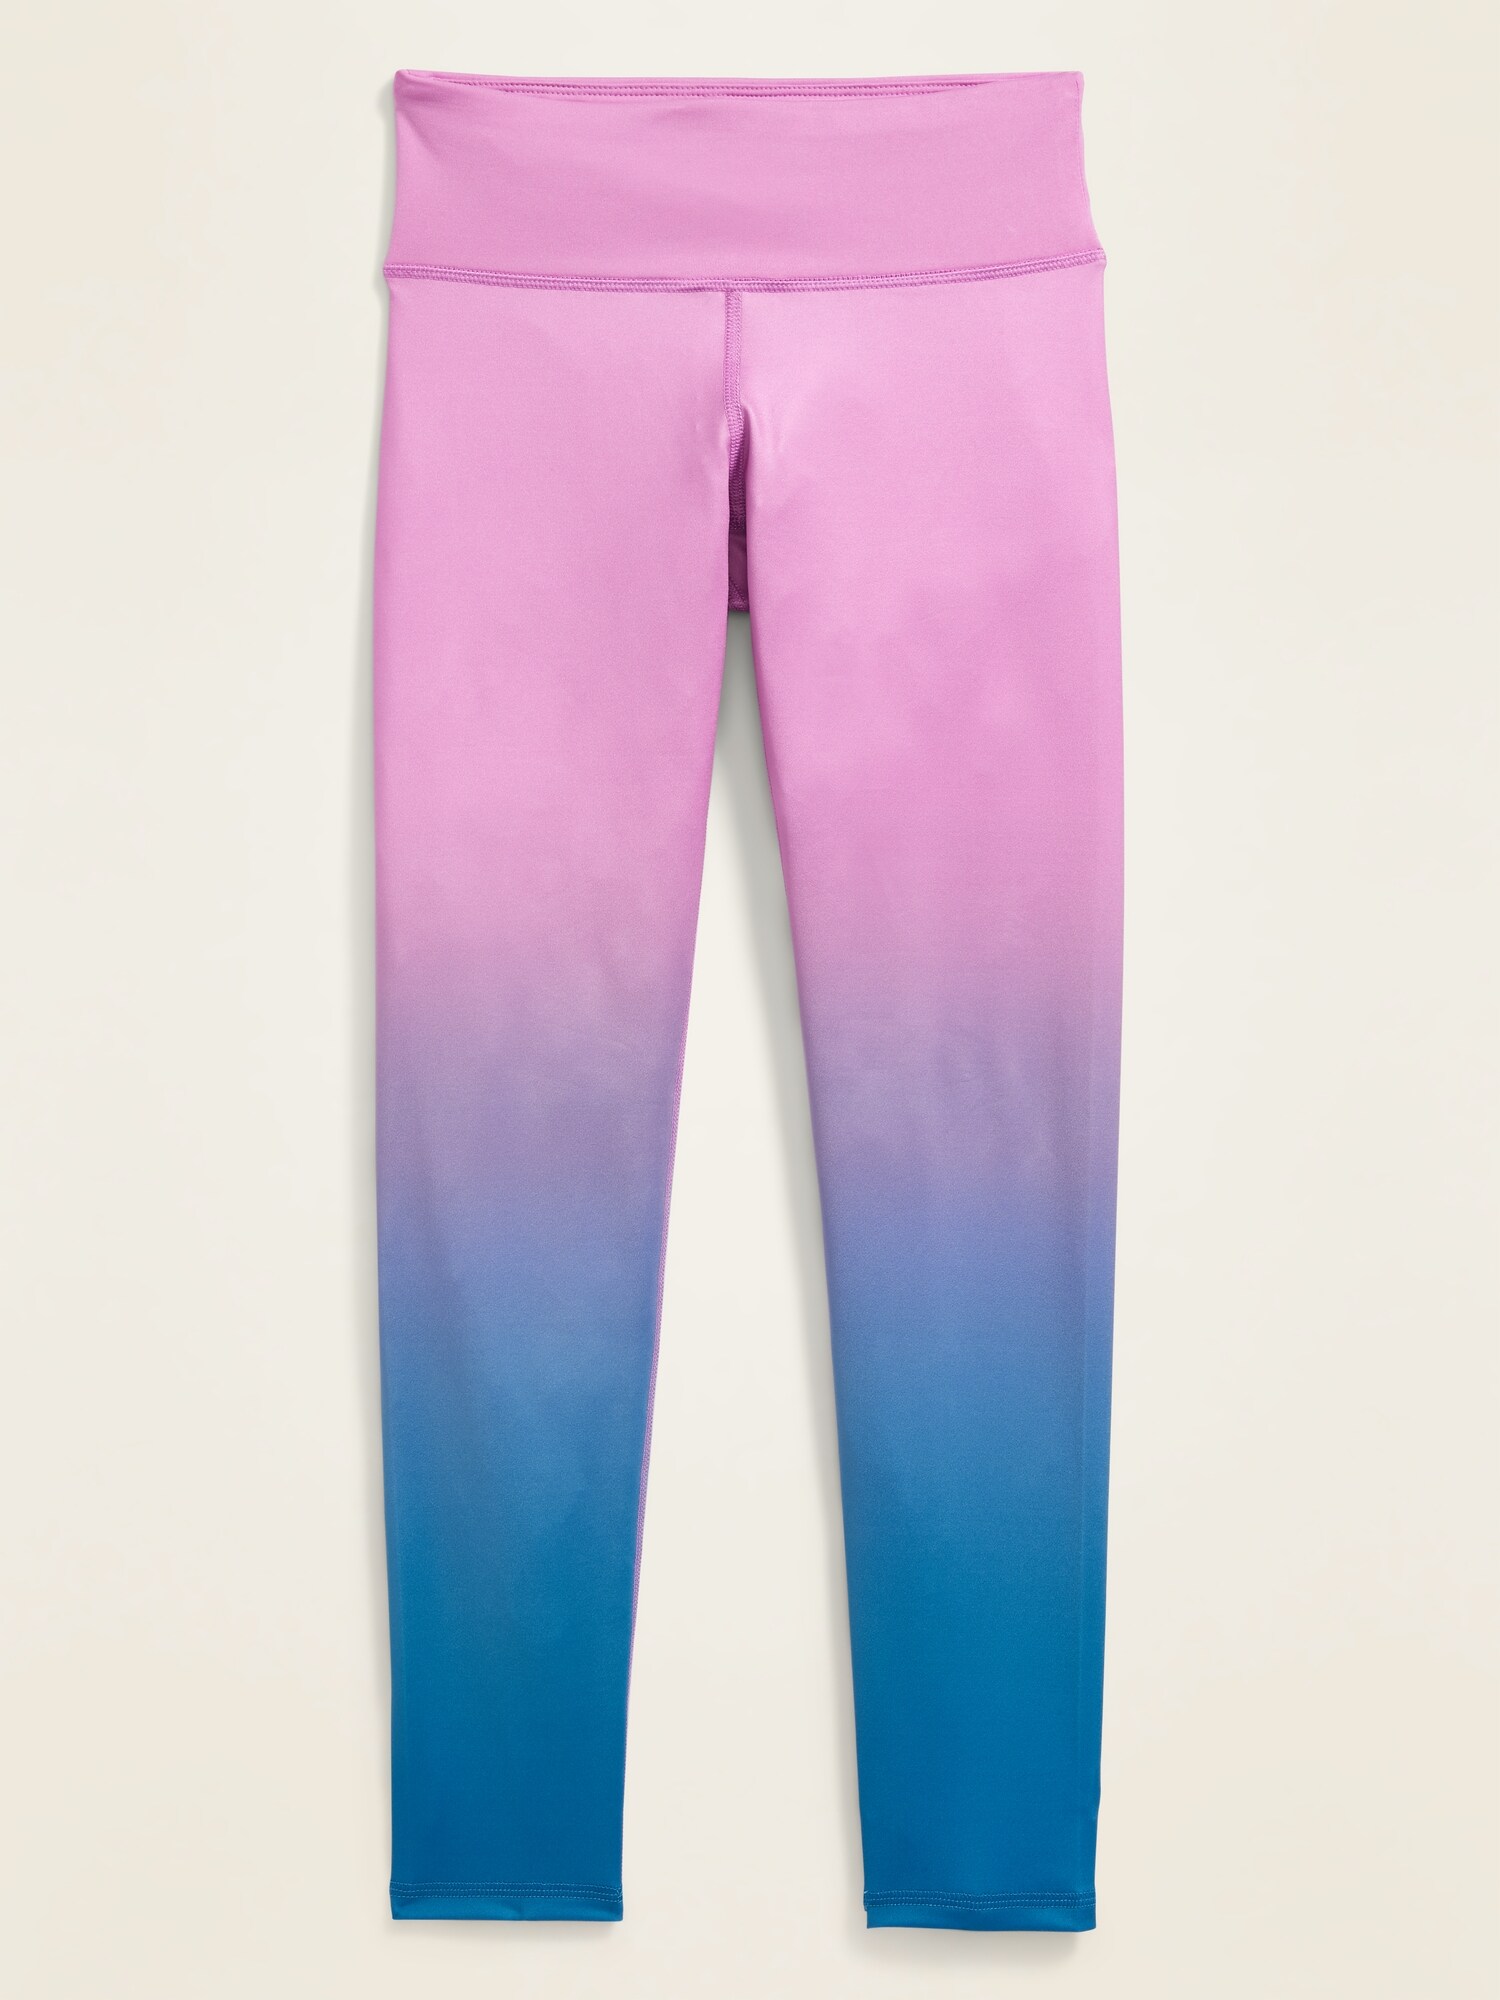 Old Navy Blue ombré leggings Size M - $7 (76% Off Retail) - From